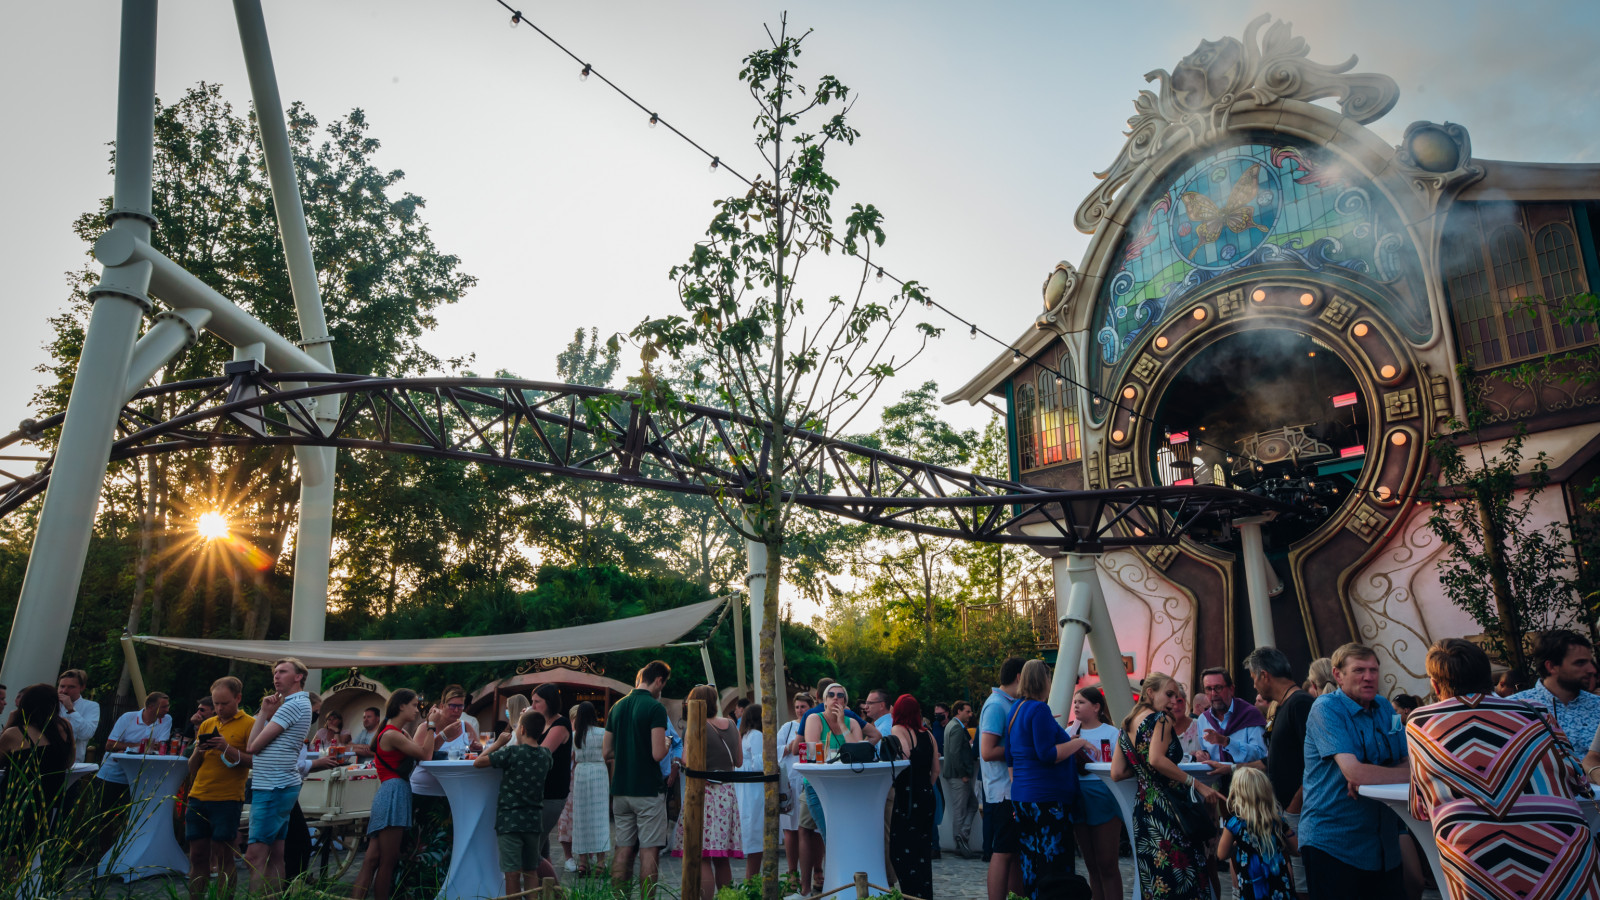 VIDEO: Spectaculaire opening ‘The Ride To Happiness by Tomorrowland’ in Plopsaland De Panne